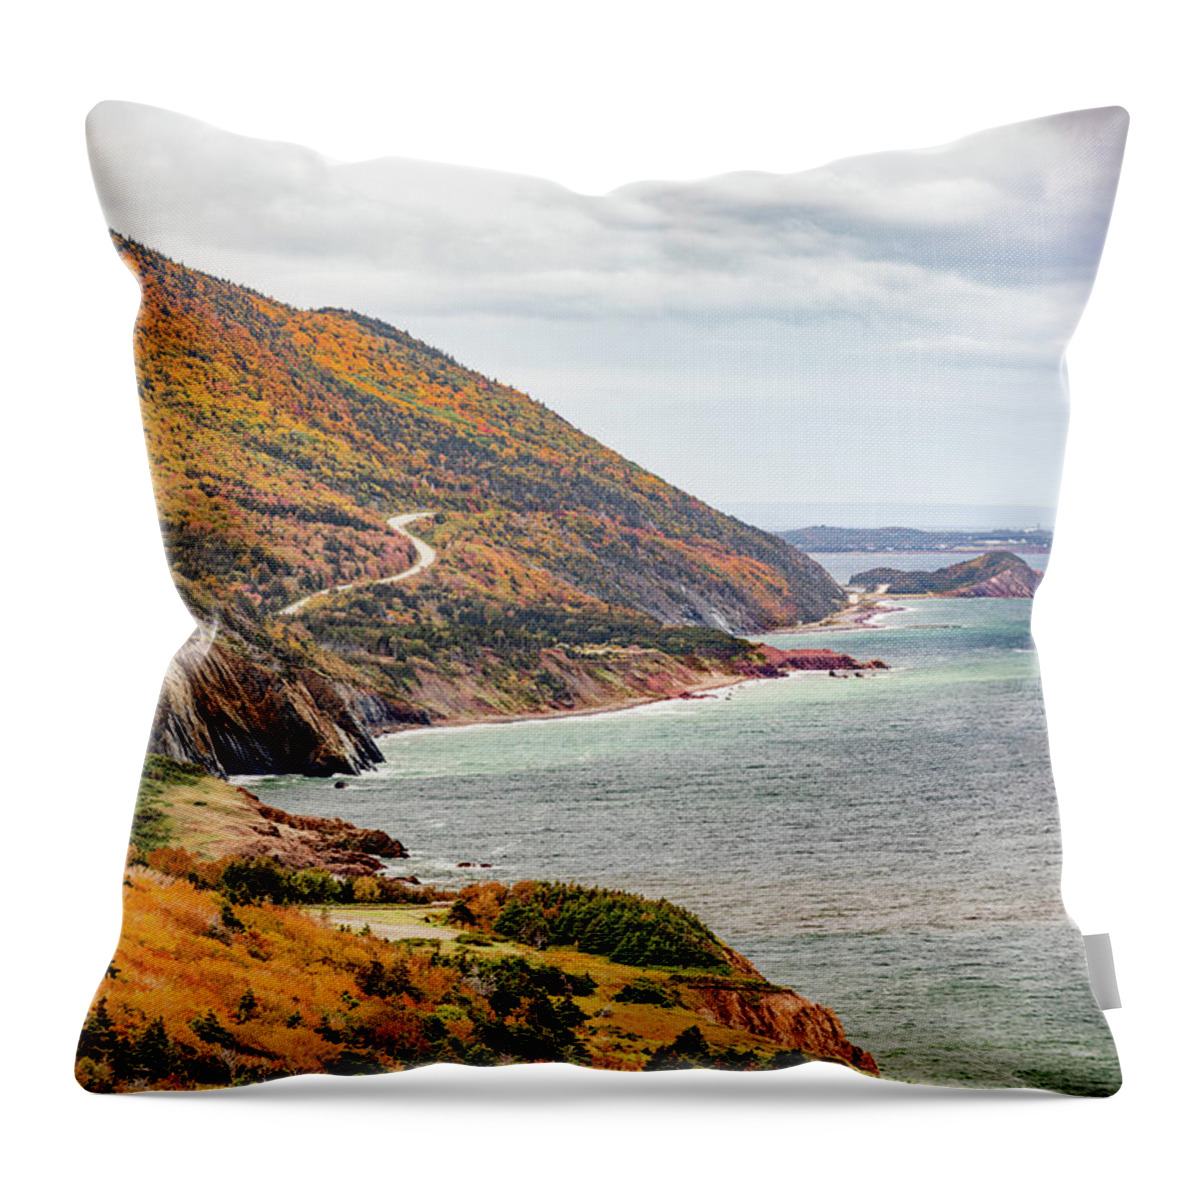 Cabot Trail Throw Pillow featuring the photograph Love the Ups and Downs by Manpreet Sokhi